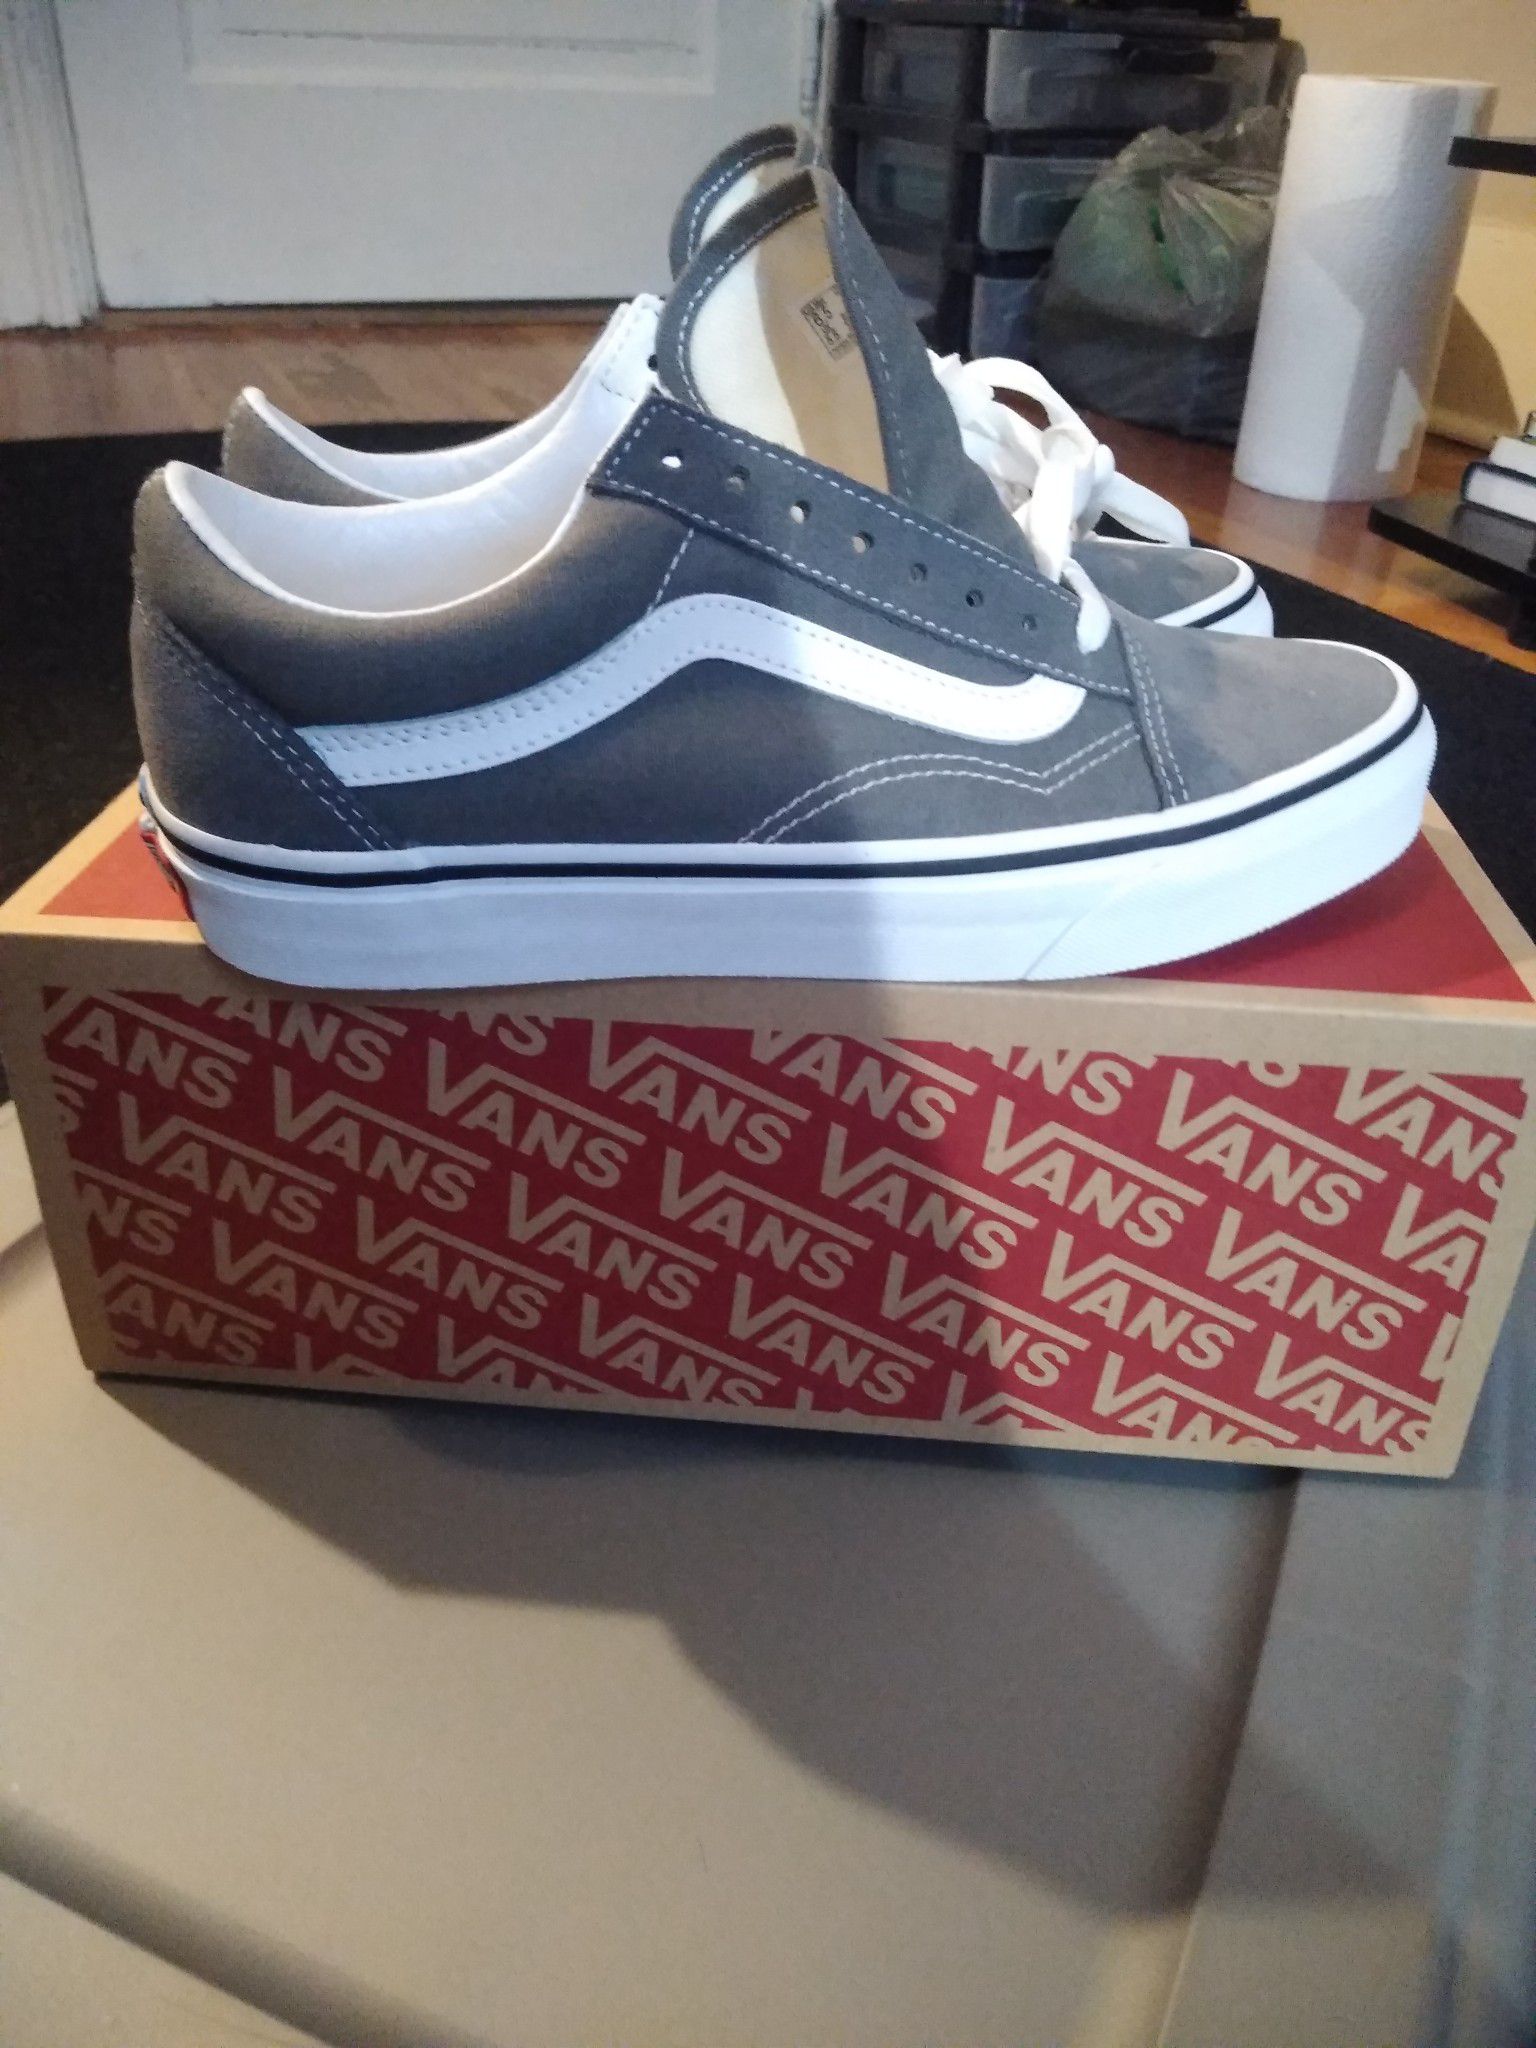 Woman's size 8 grey and white Vans